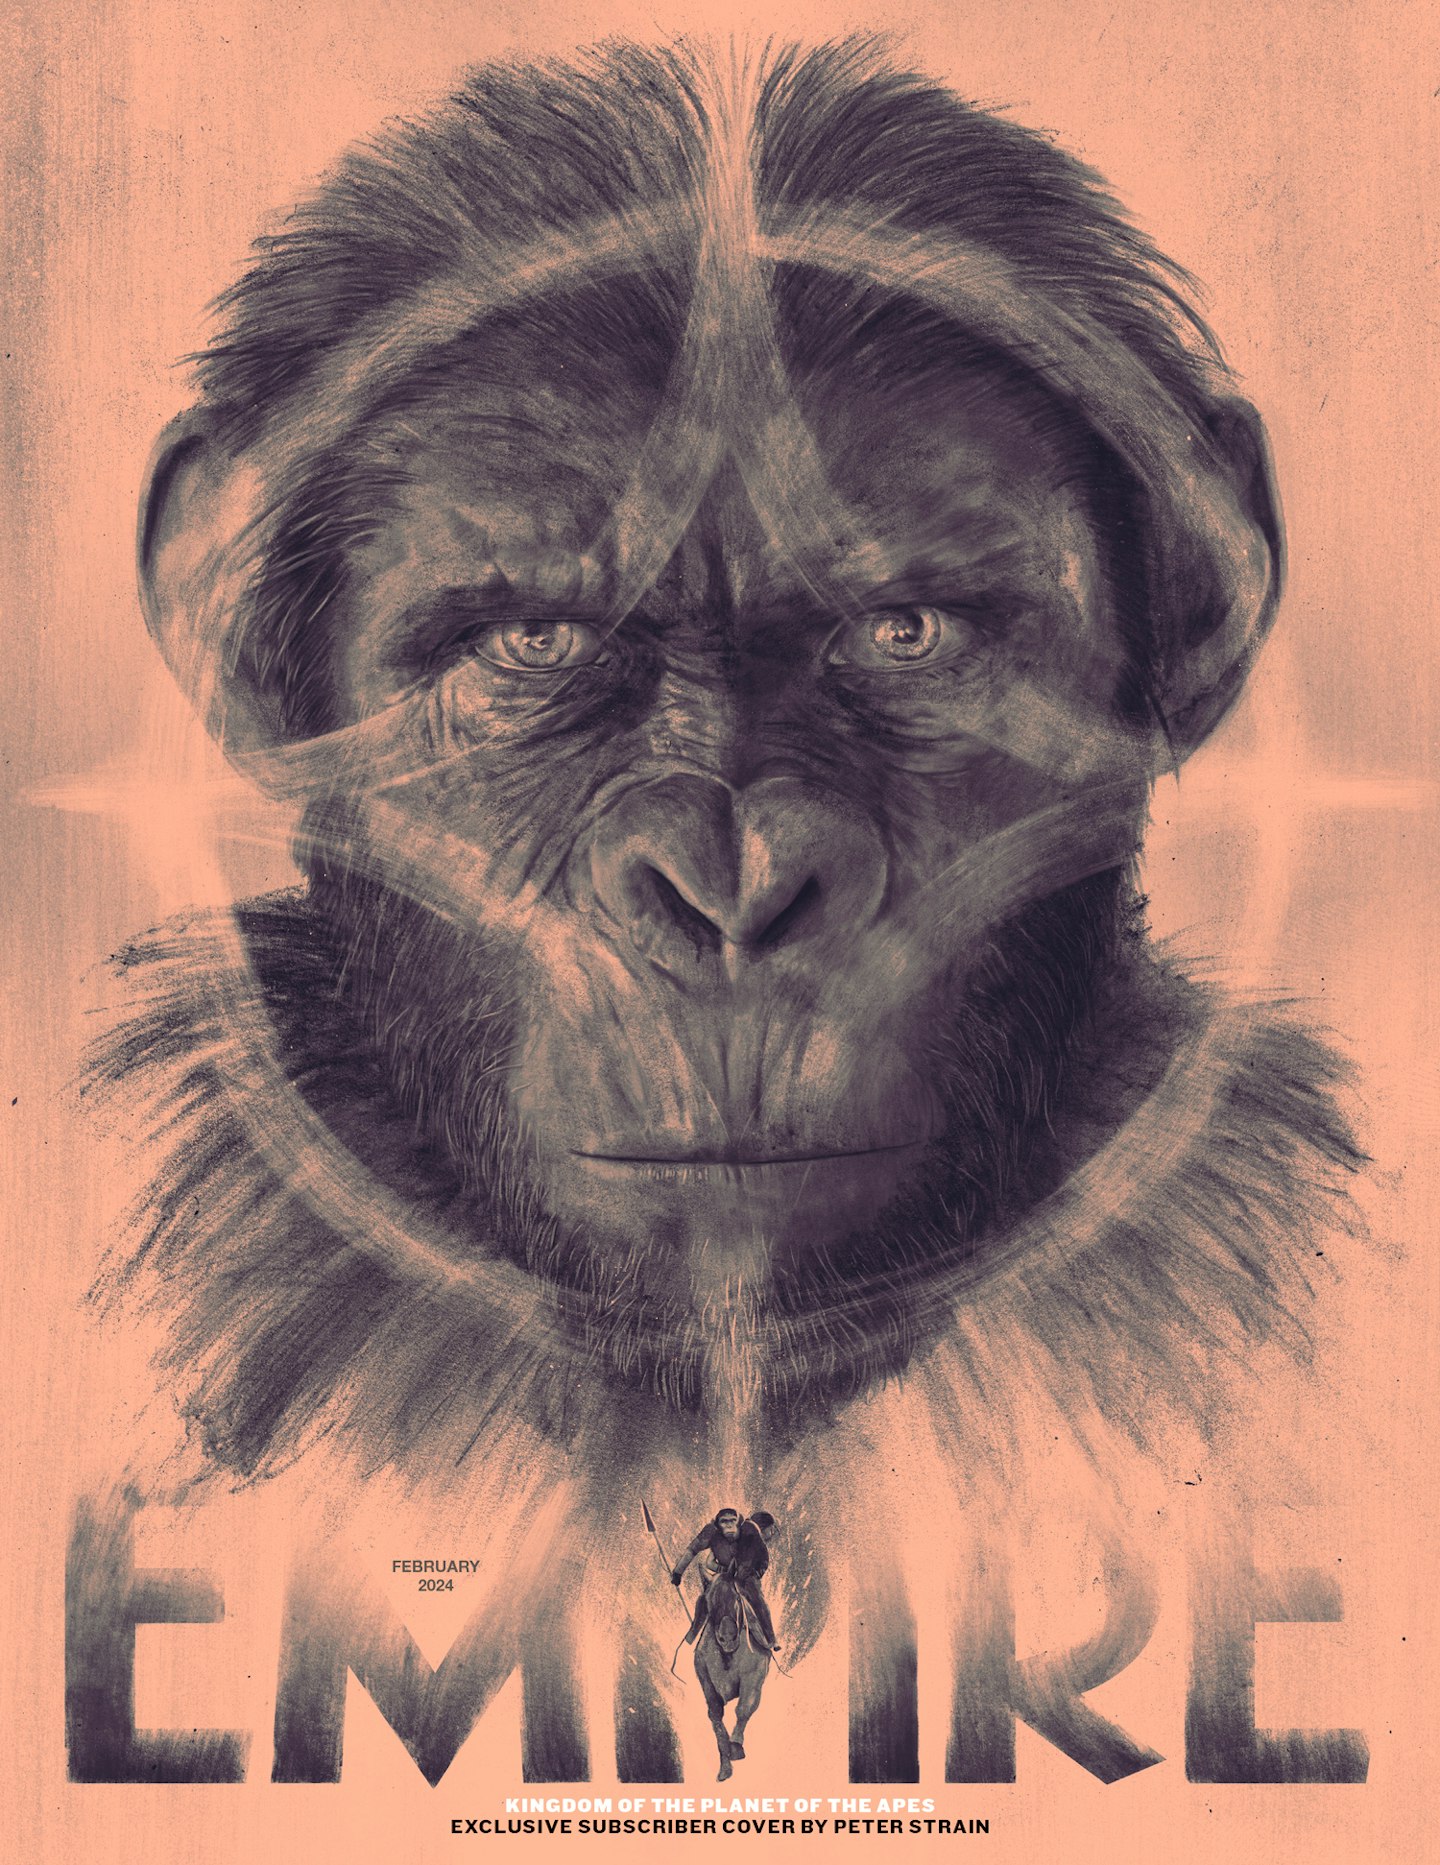 Empire – February 2024 – Kingdom Of The Planet Of The Apes subscriber cover